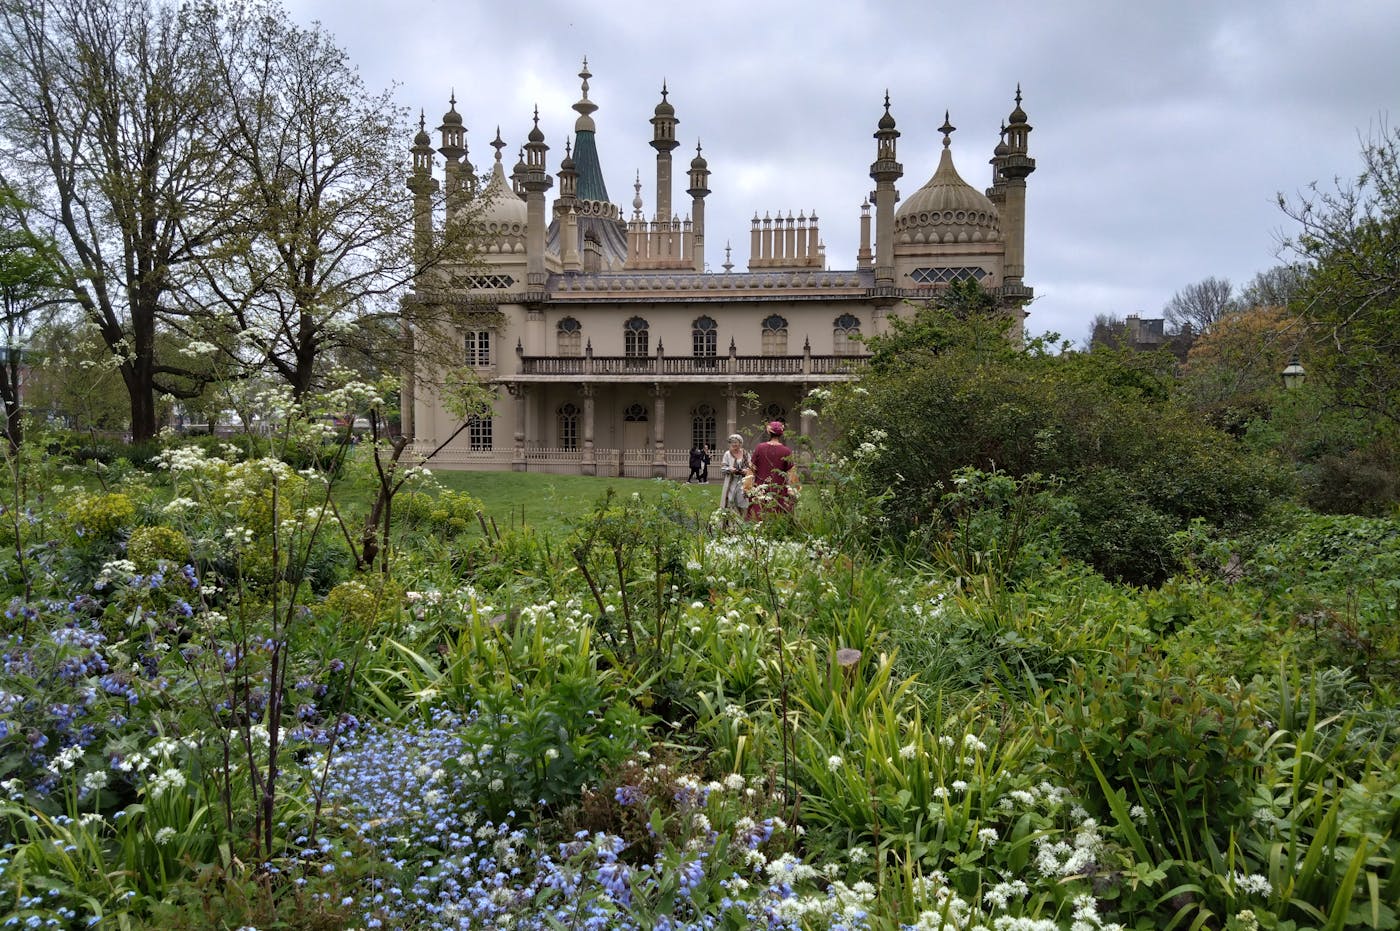 a building with towers and spires in front of a garden